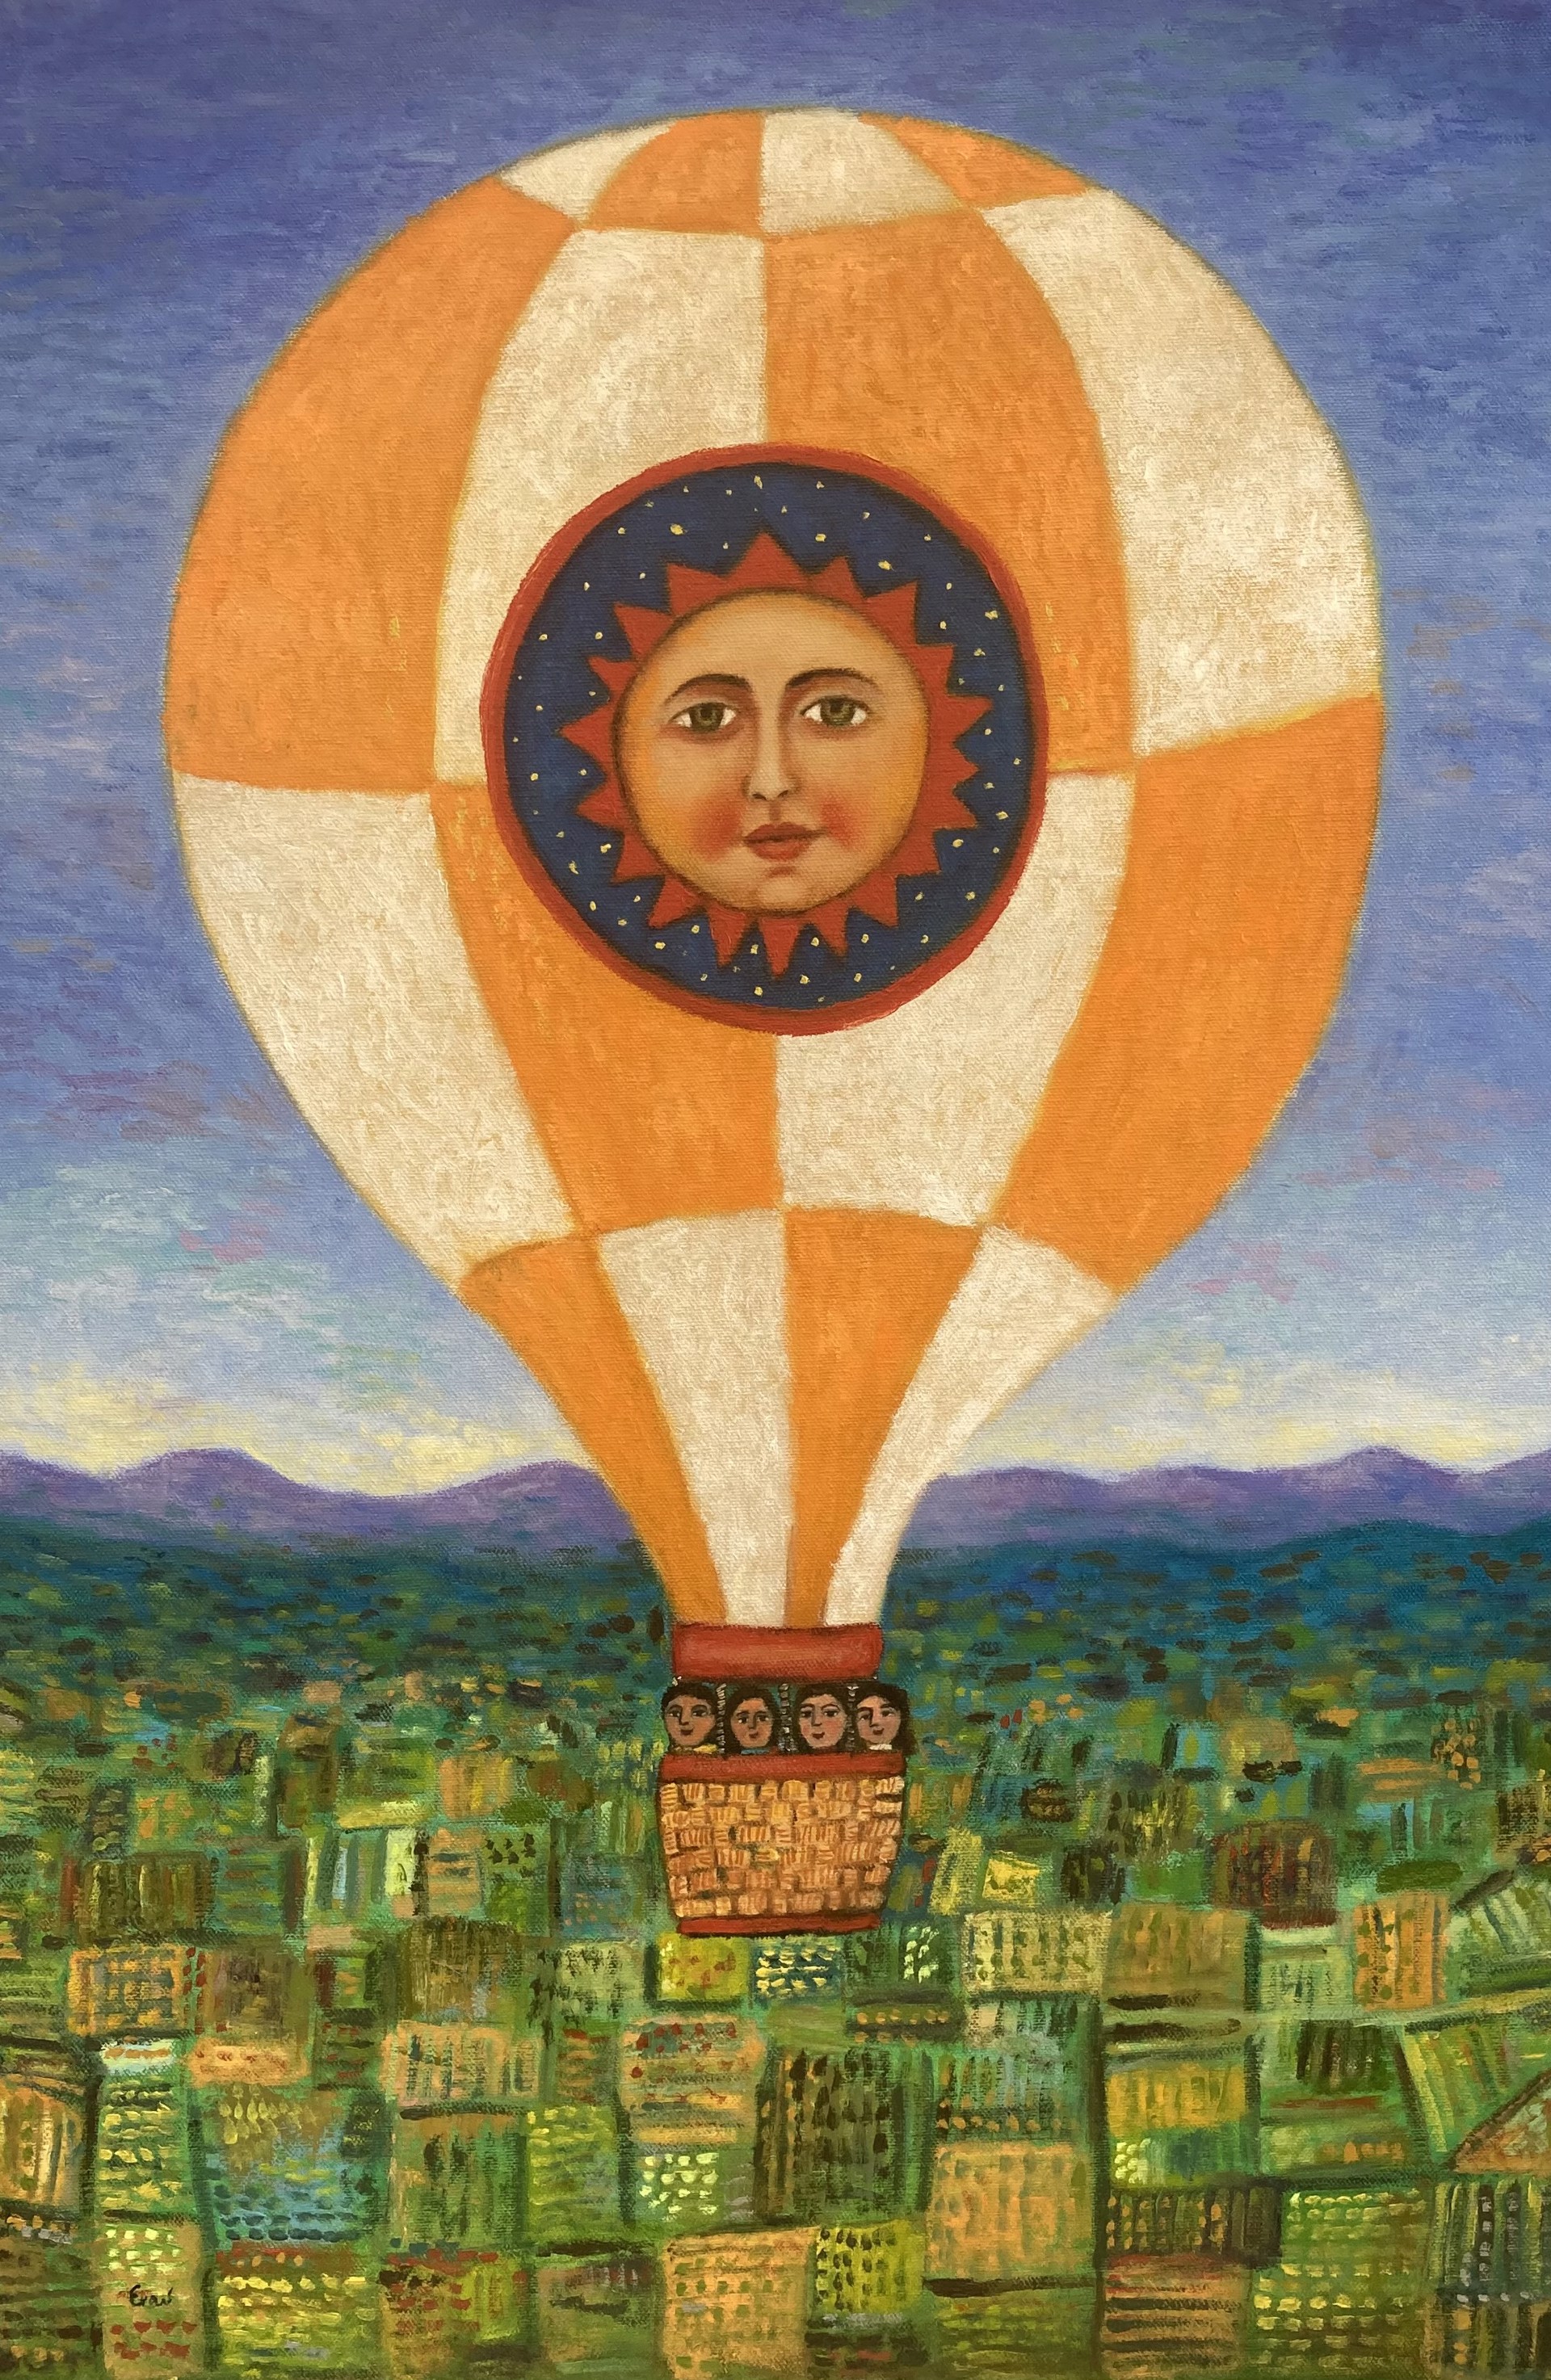 The Air Balloon by Esau Andrade